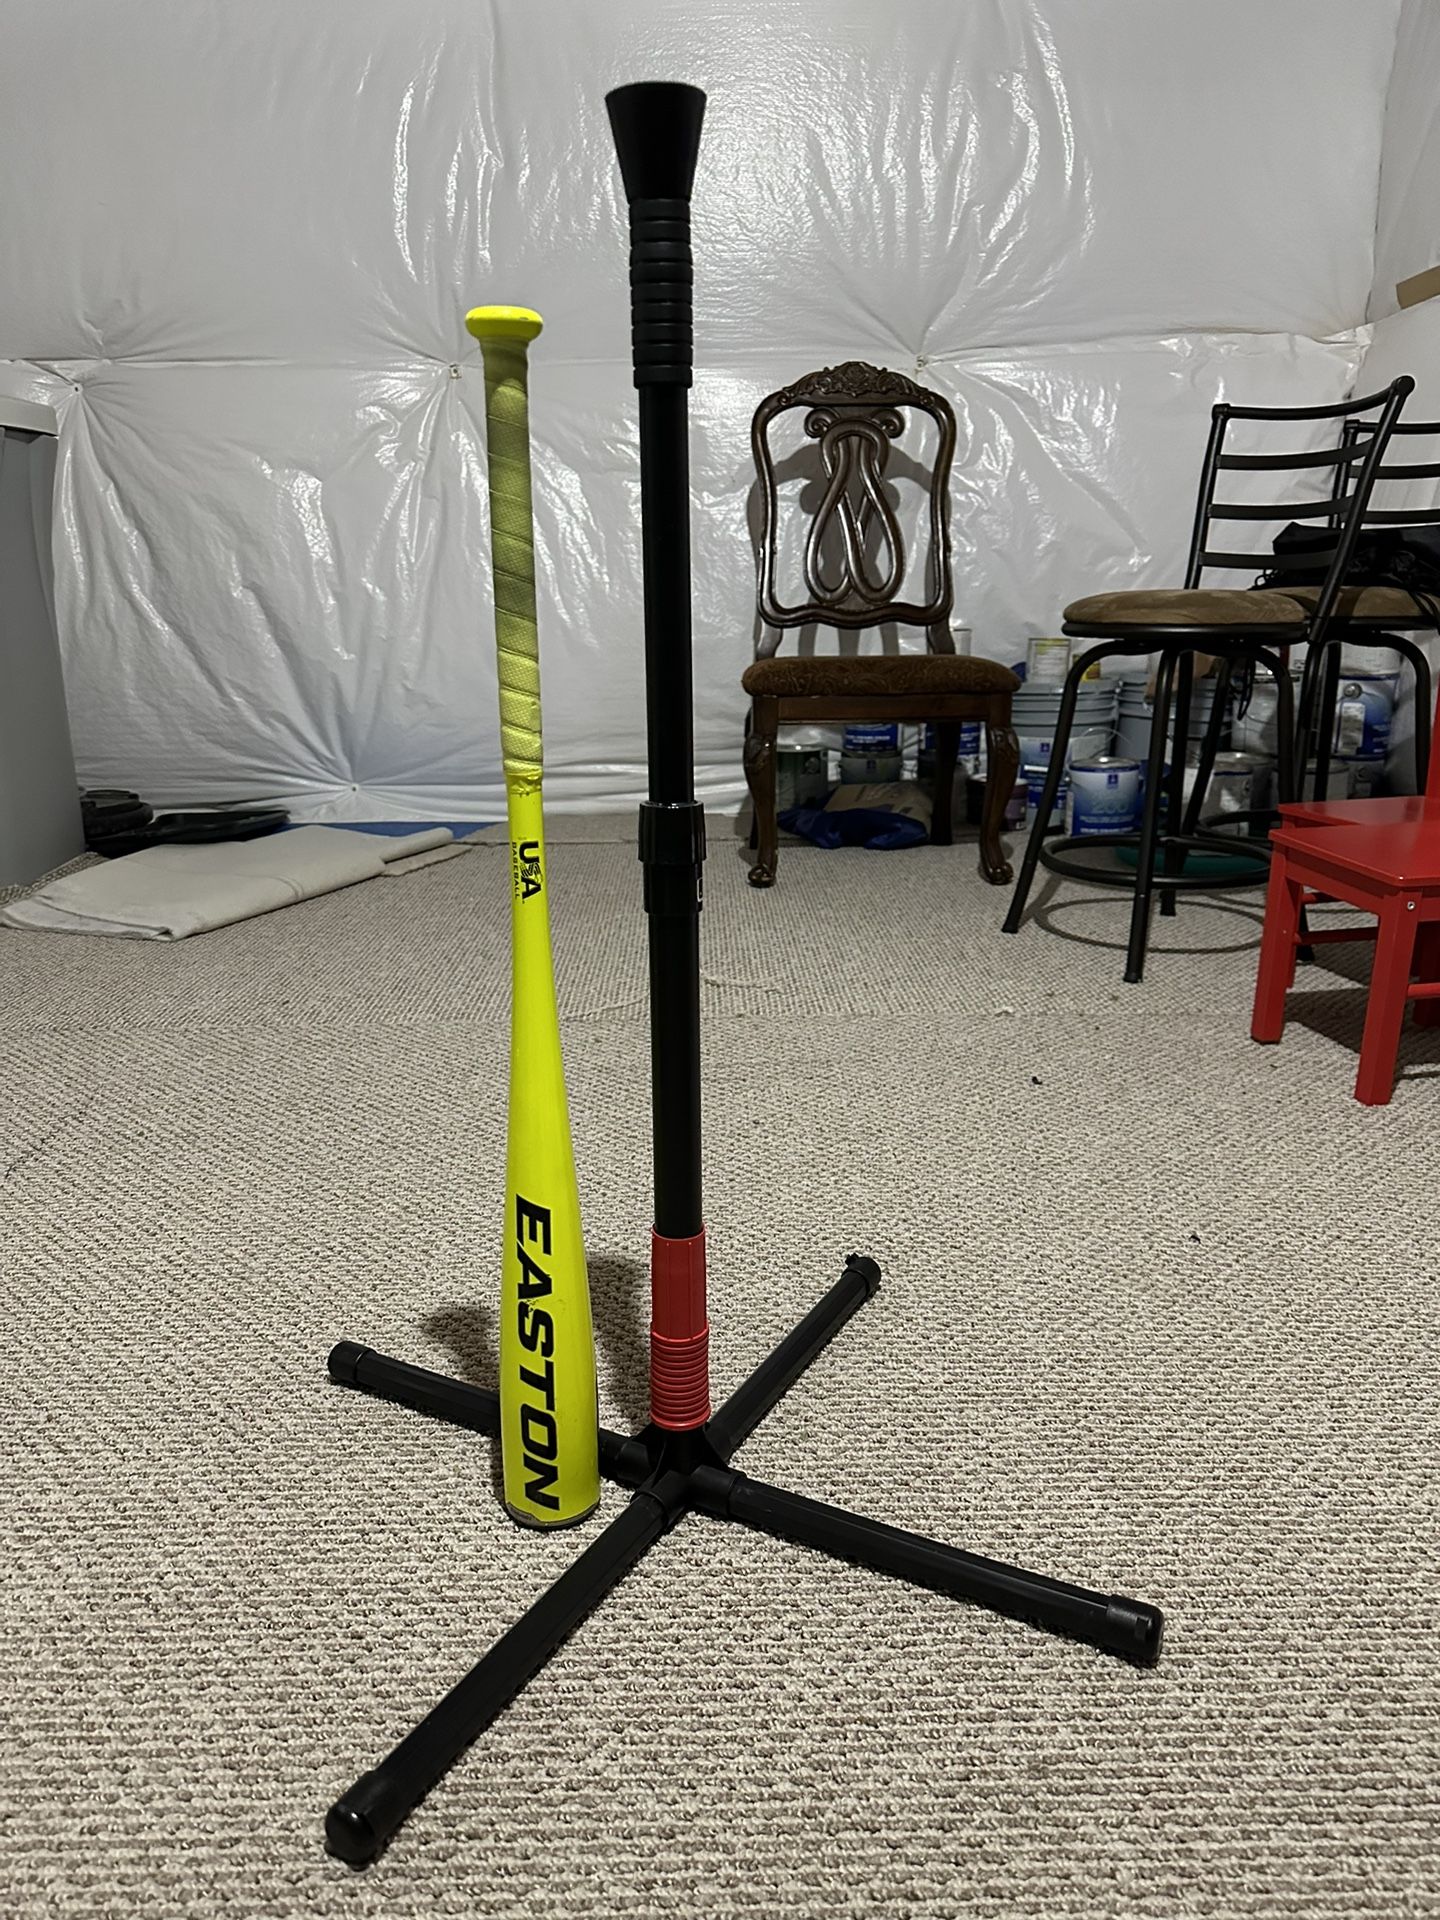 Easton 30 Inch Bat And Franklin Baseball Tee For Hitting Practice